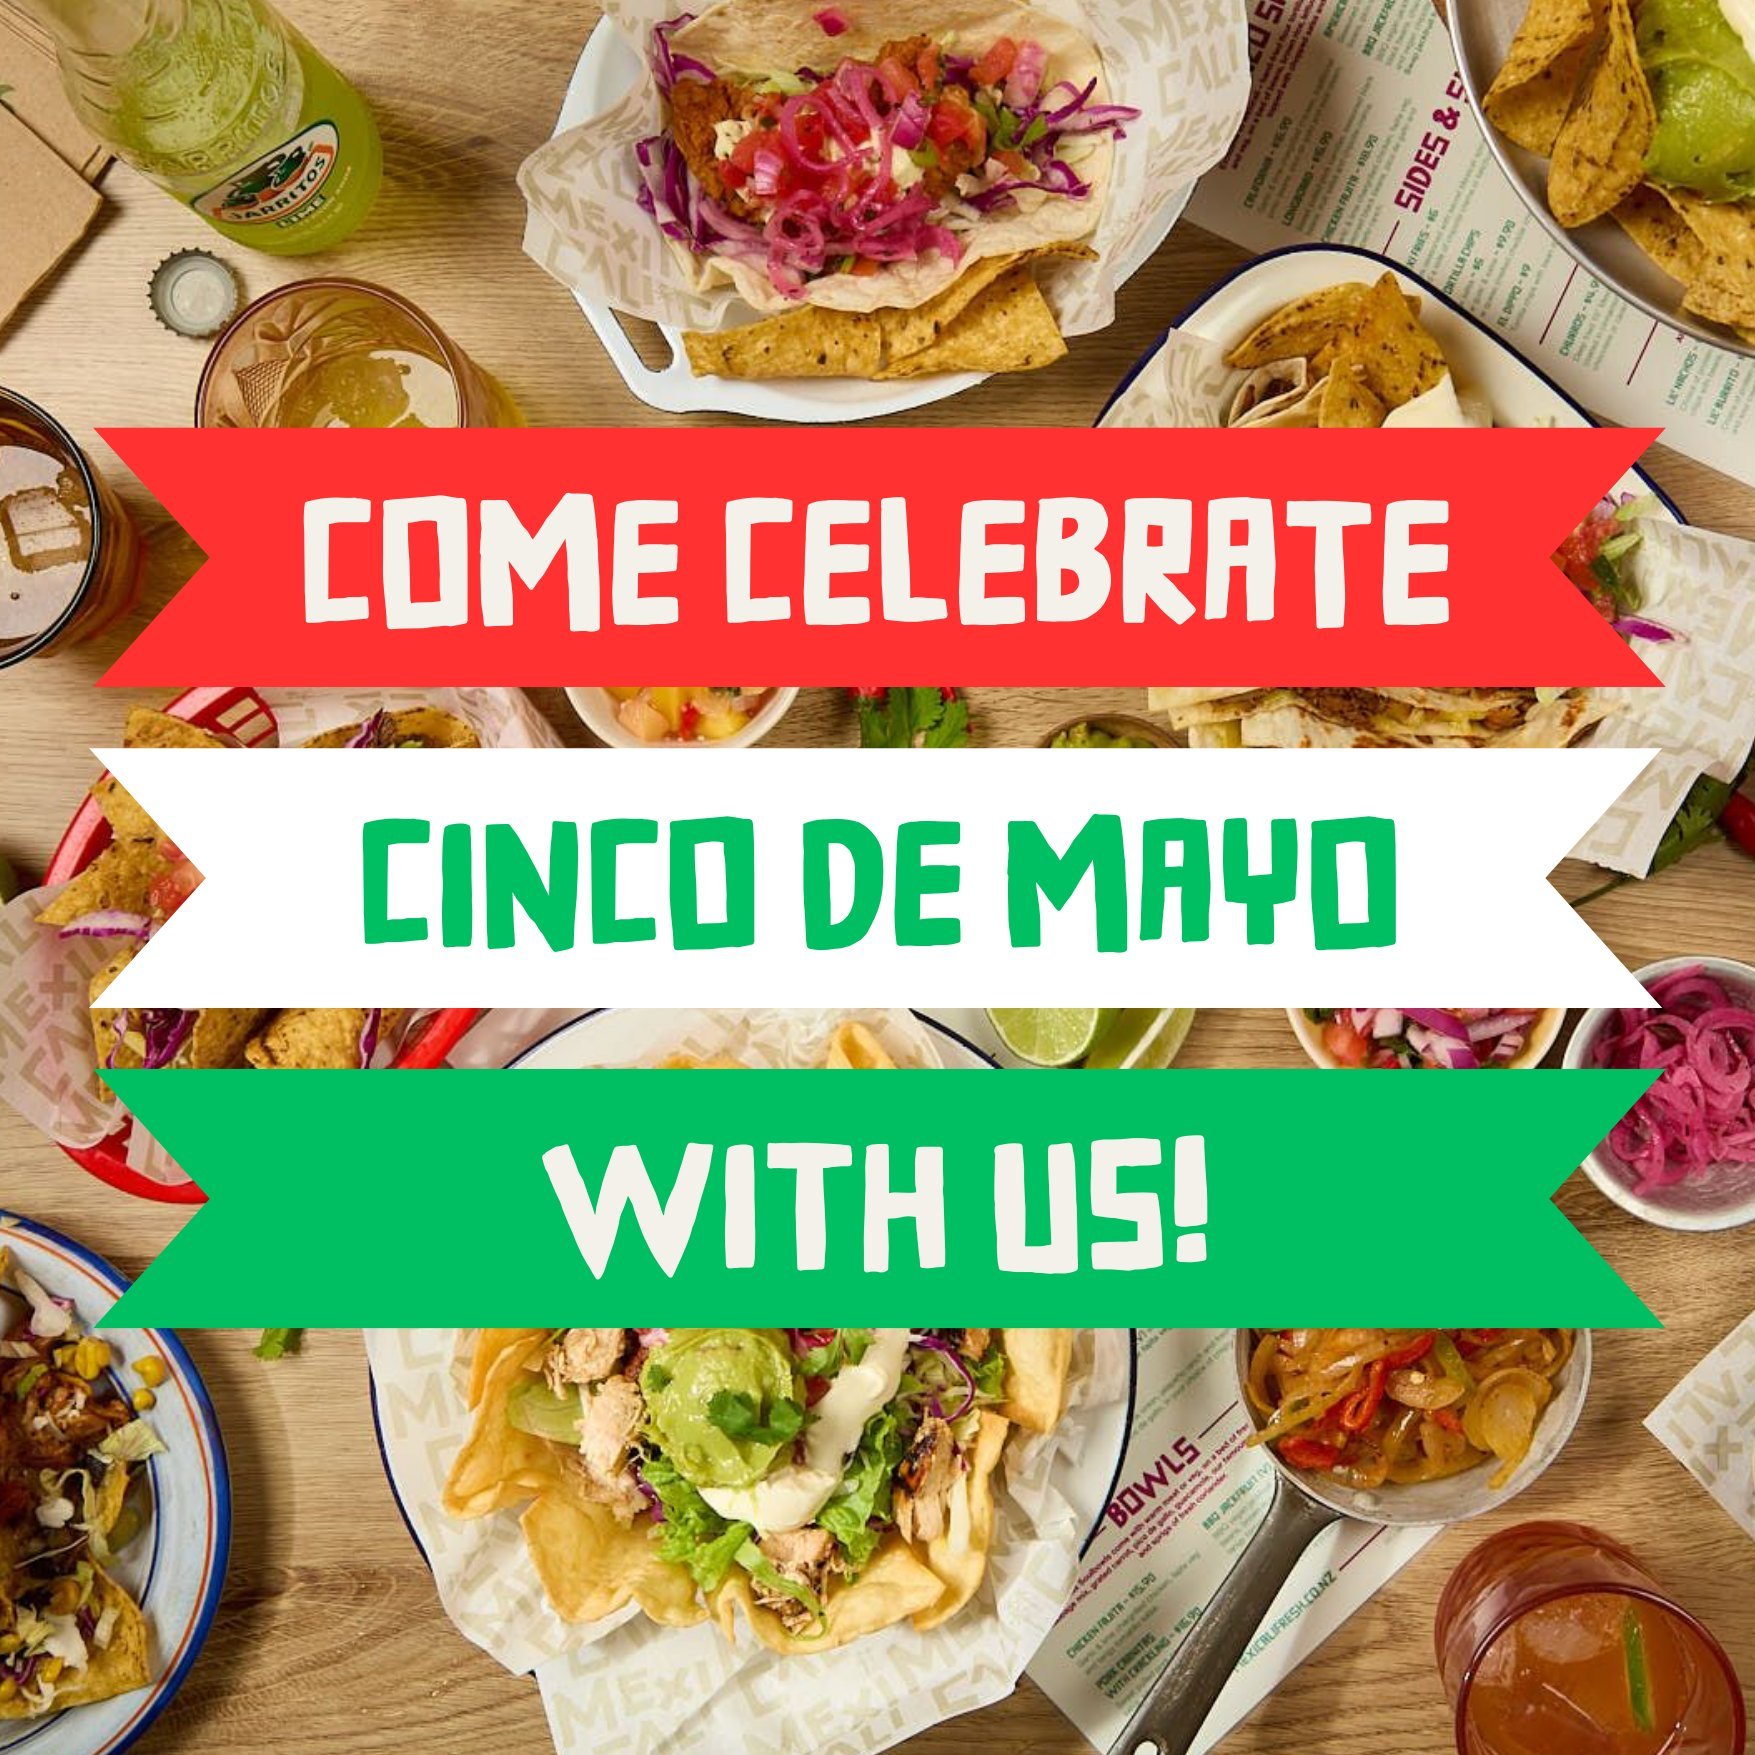 We're having a Cinco De Mayo fiesta and you're invited! 🇲🇽
THIS SUNDAY come down to your local Mexi store to celebrate with us.

We have a great celebration lined up...
👧 Kids Eat Free*
🎨 Free Face Painting 12-2pm
🥤 Free V Zero Sugar Original*
?